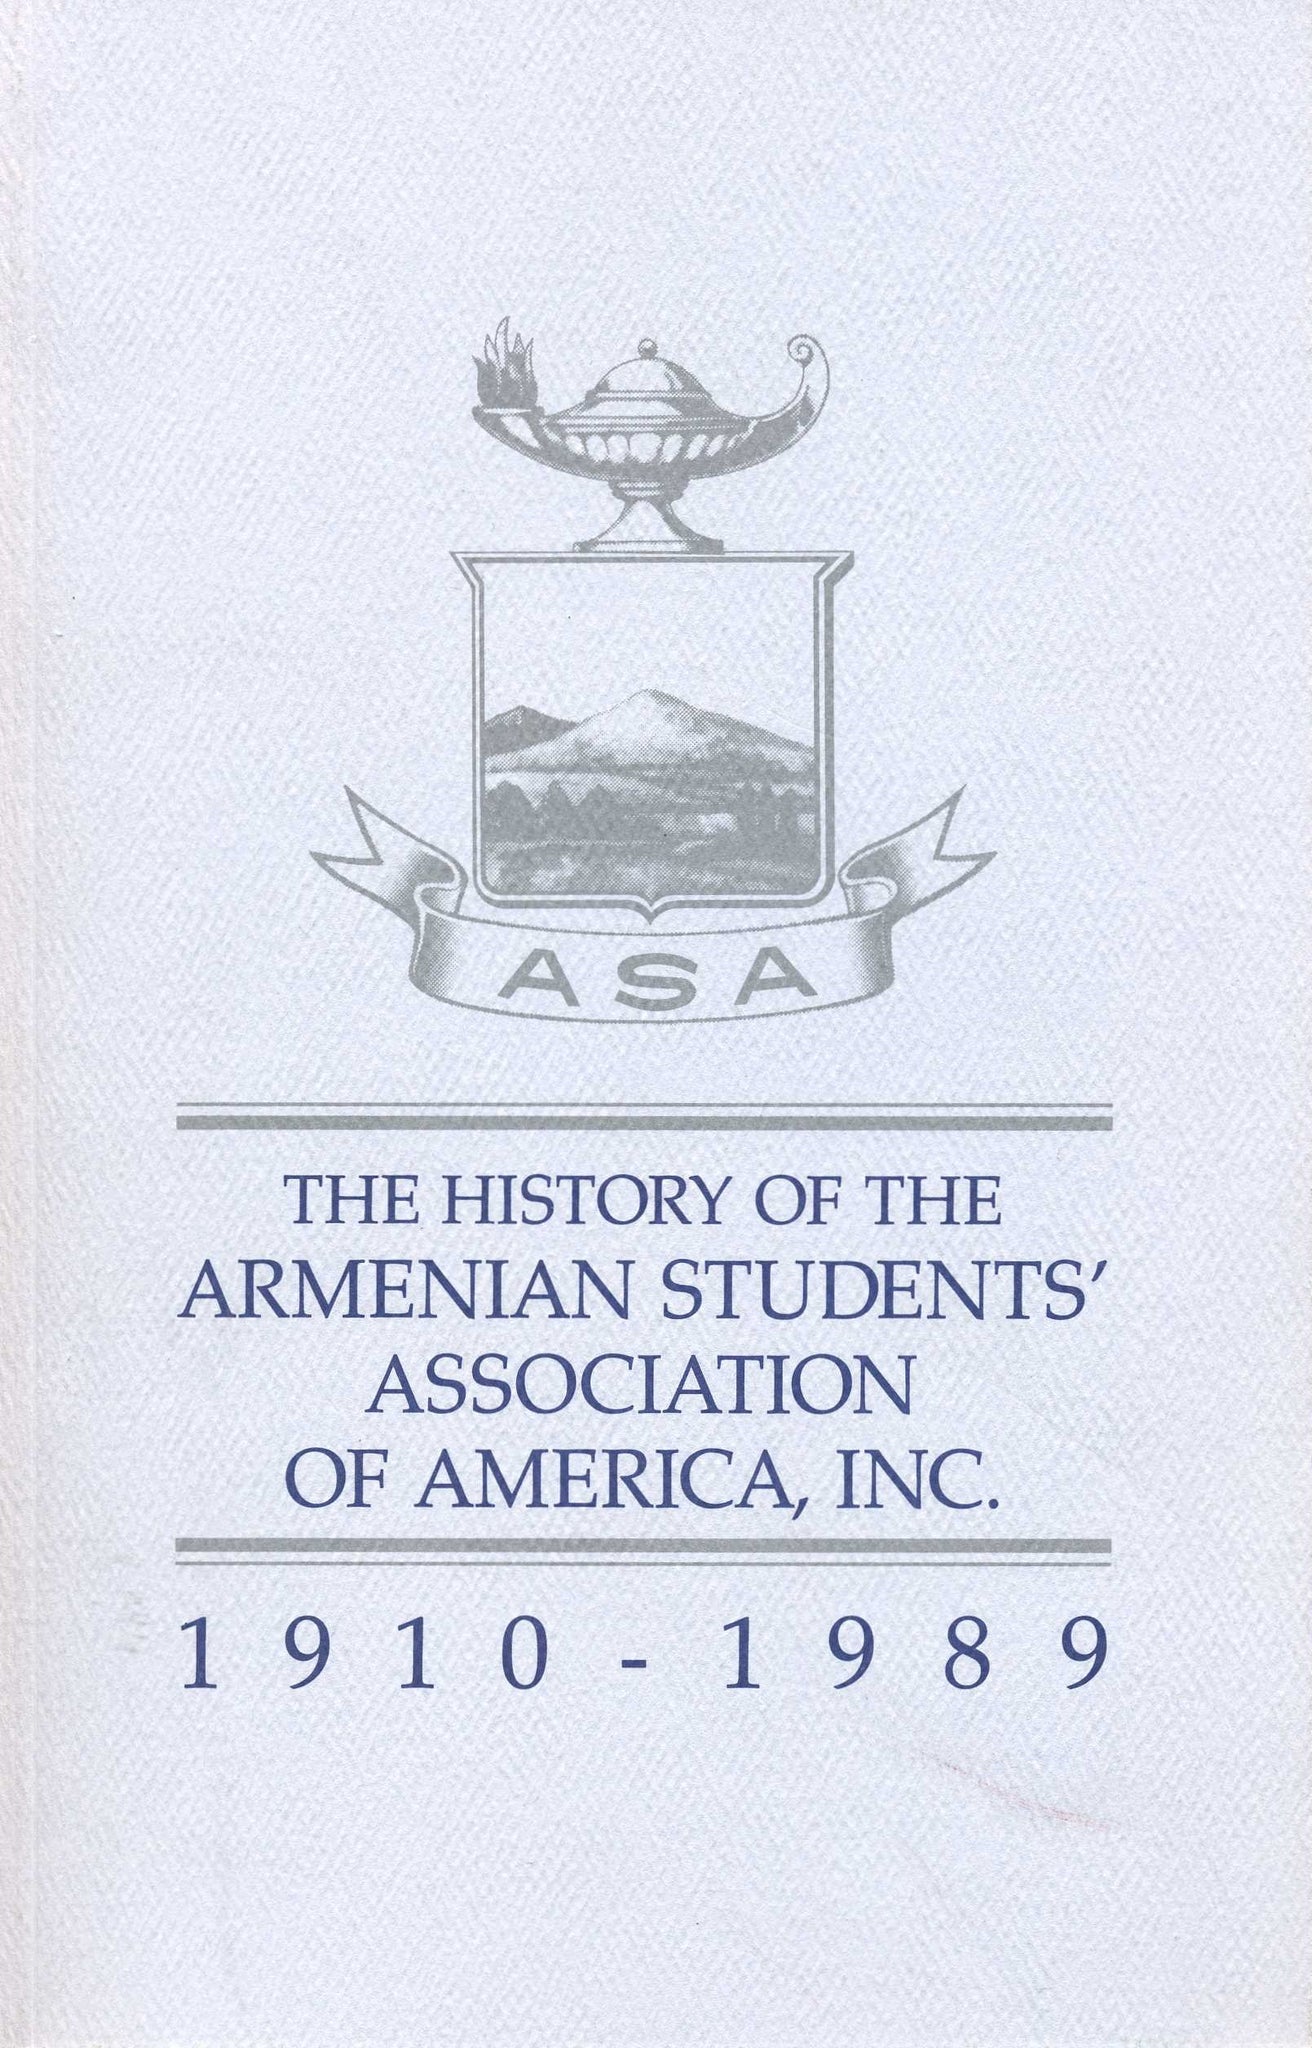 HISTORY OF THE ARMENIAN STUDENTS ASSOCIATION OF AMERICA, INC., 1910-1989